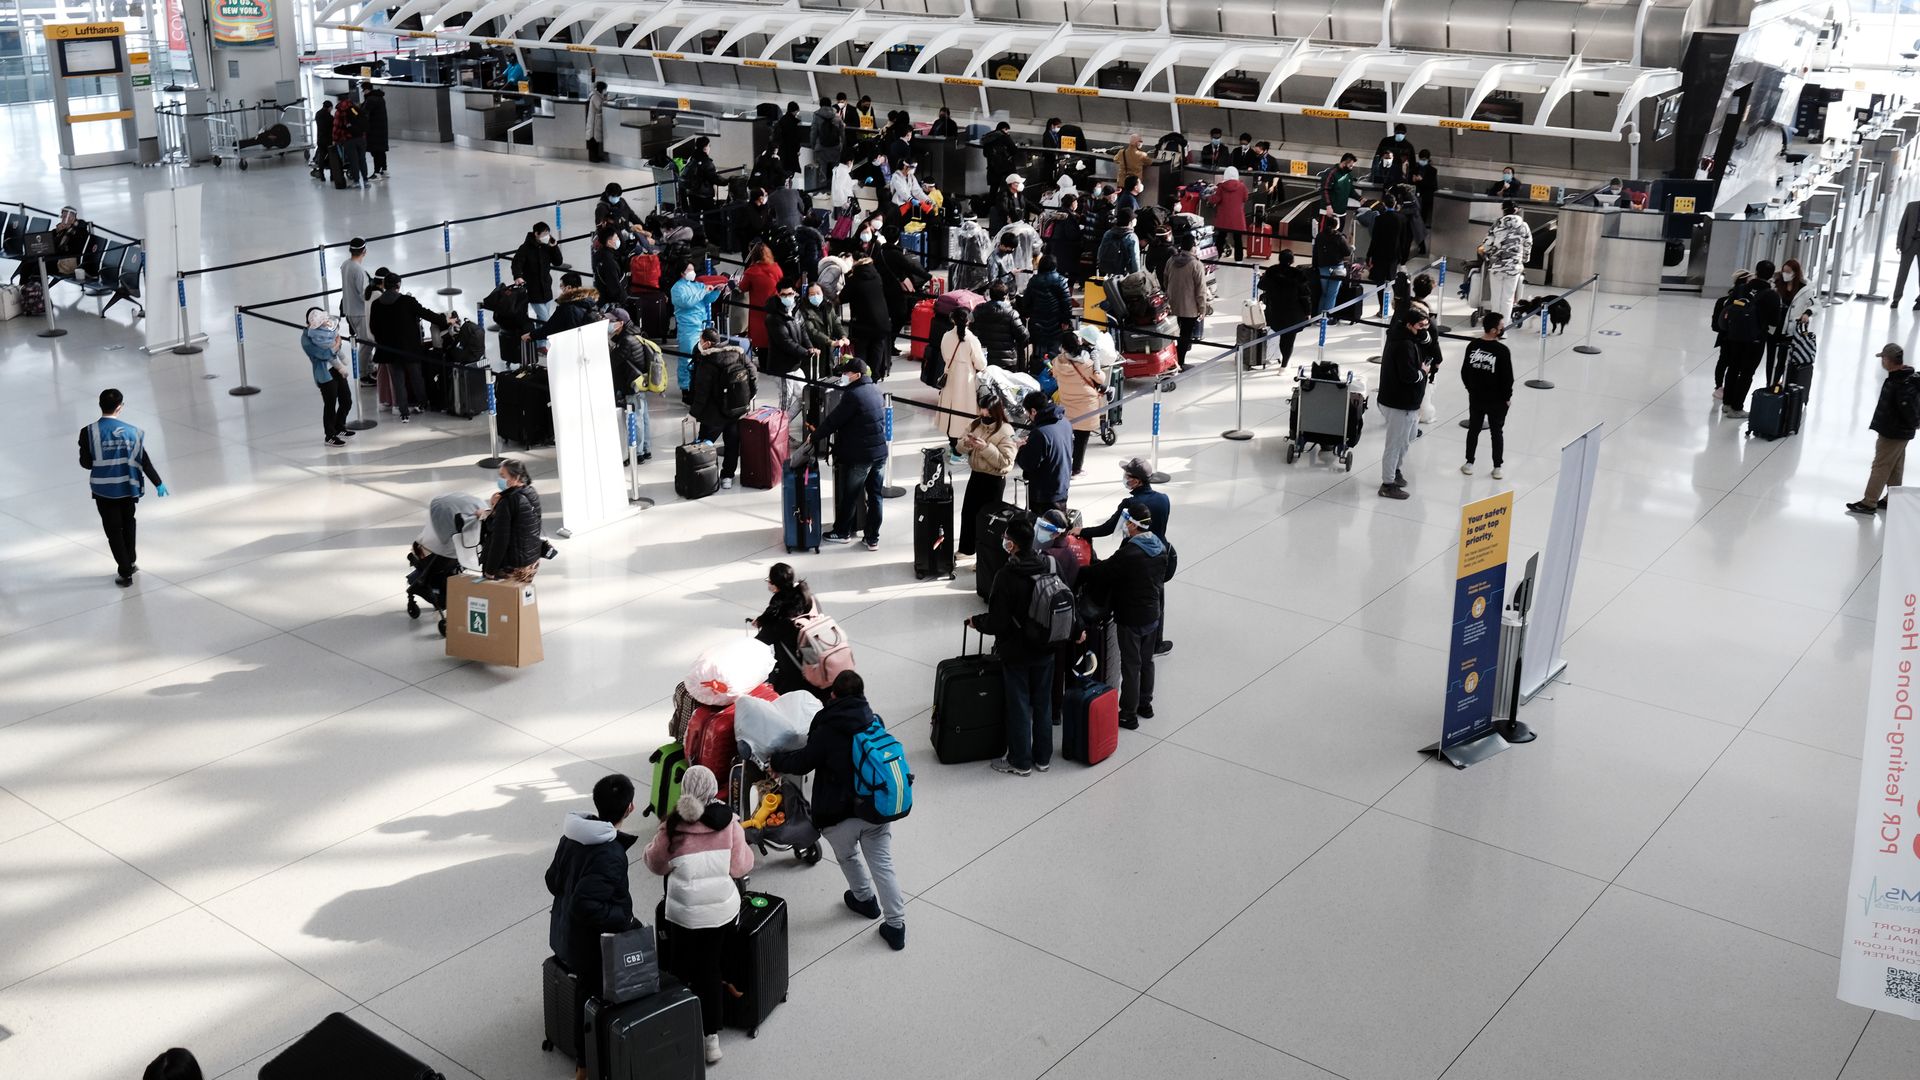 Image of people waiting at the ticket area for JFK International Airport.